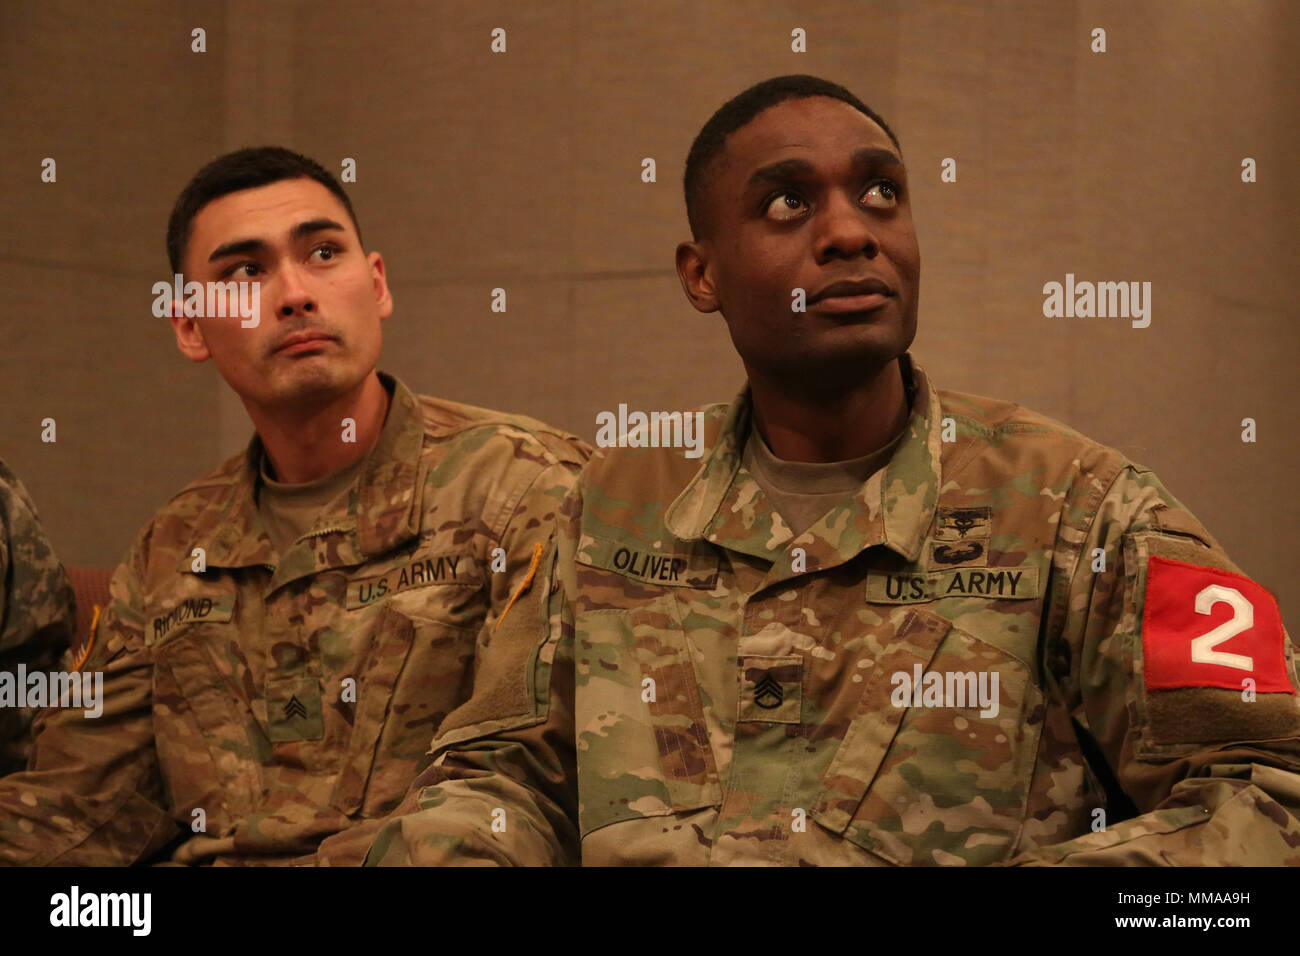 U.S. Army Sgt. Kevin Richmond and Staff Sgt. Brandon Oliver, assigned to the Martin Army Community Hospital, listen to speakers during the 2017 Best Medic Competition Award Ceremony at Fort Bragg, N.C., Sept. 20, 2017. The competition tested the physical and mental toughness, as well as the technical competence, of each medic to identify the team moving forward to represent the region at the next level of the competition.  (U.S. Army photo by Pfc. Meleesa Gutierrez) Stock Photo